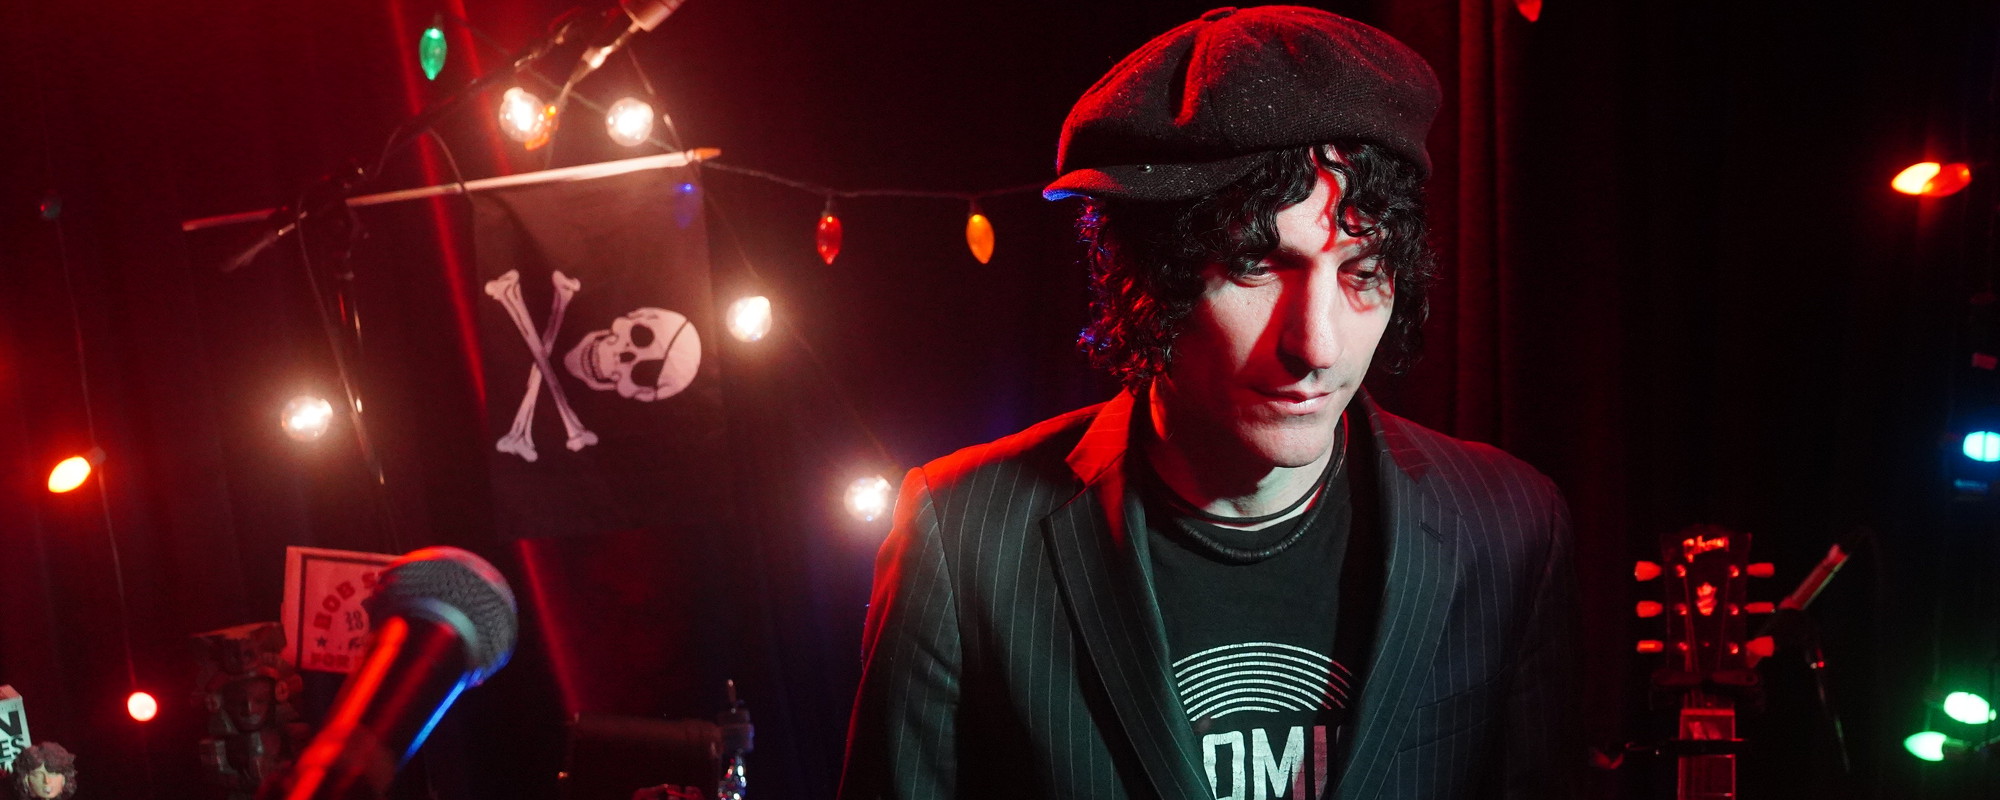 Review: The Double Album Length ‘Sad And Beautiful World’ Explores Both Sides Of Jesse Malin’s Talents